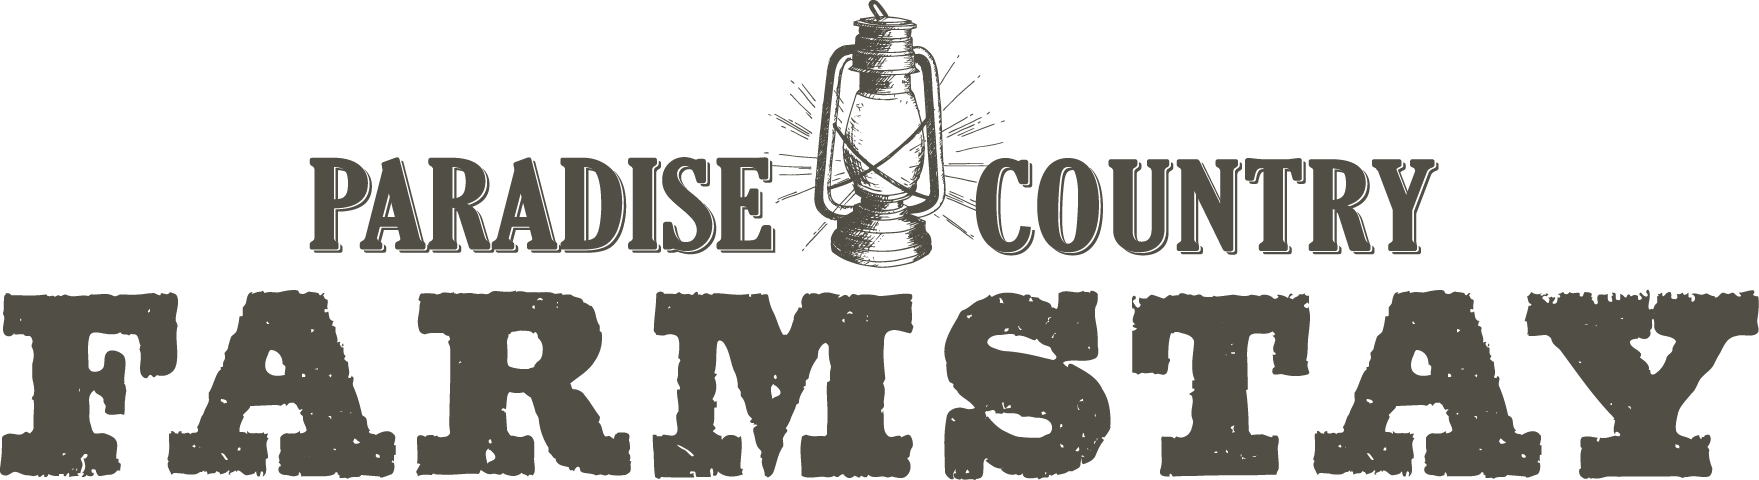 Logo of Paradise Country Farmstay featuring stylized text and a filament light bulb on a green background.